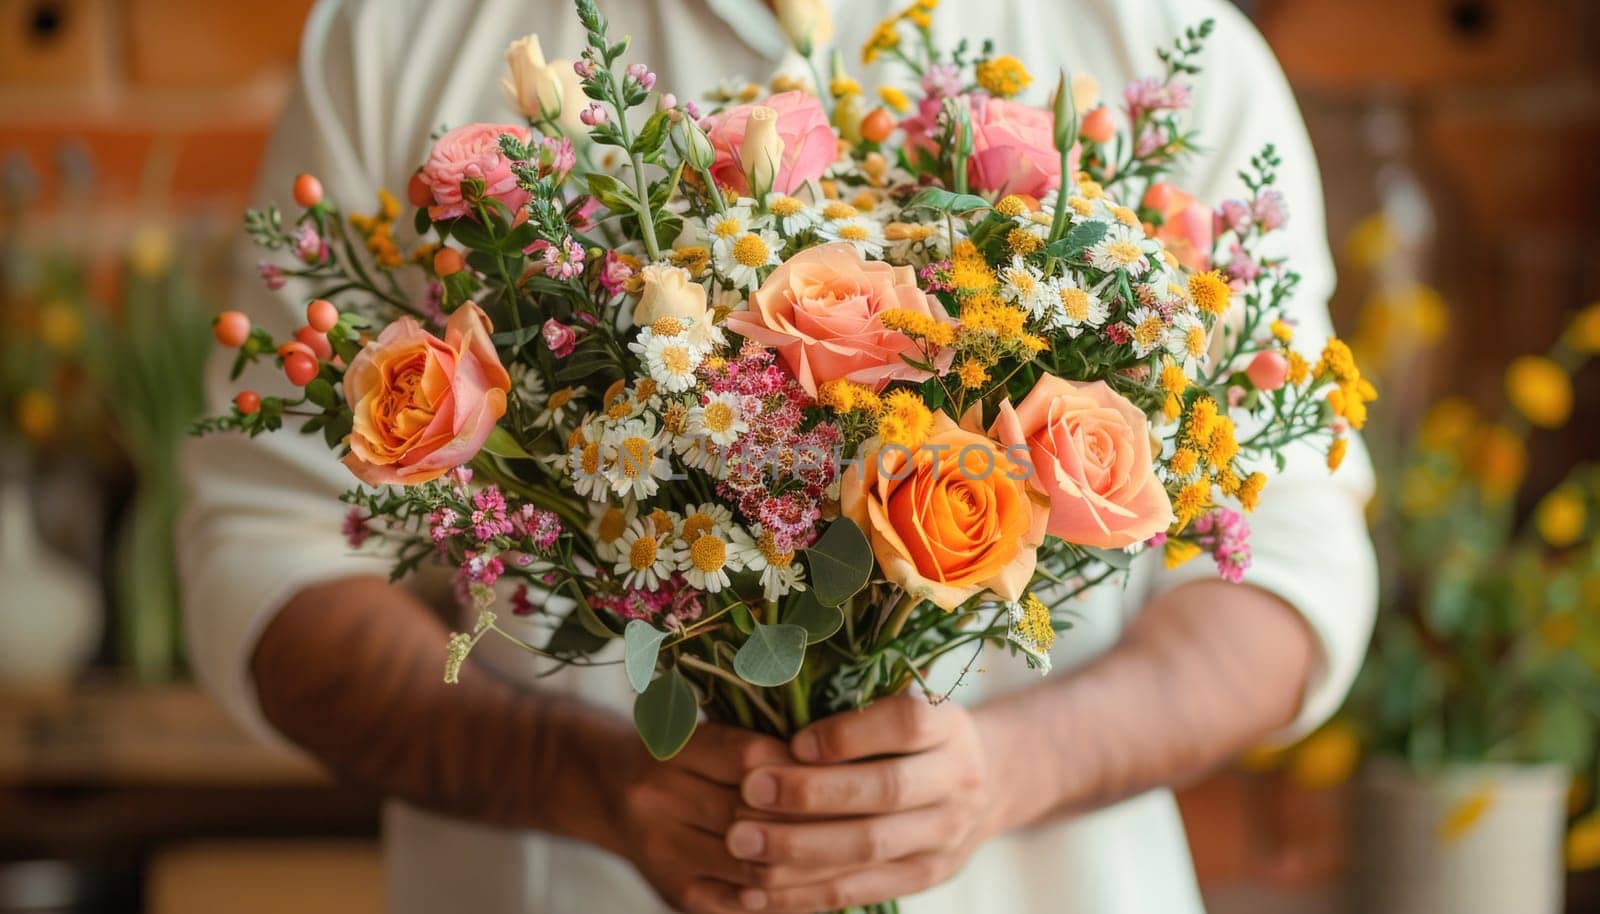 A man displays a gentle touch as he holds a beautiful arrangement of hybrid tea roses and garden roses in a bouquet